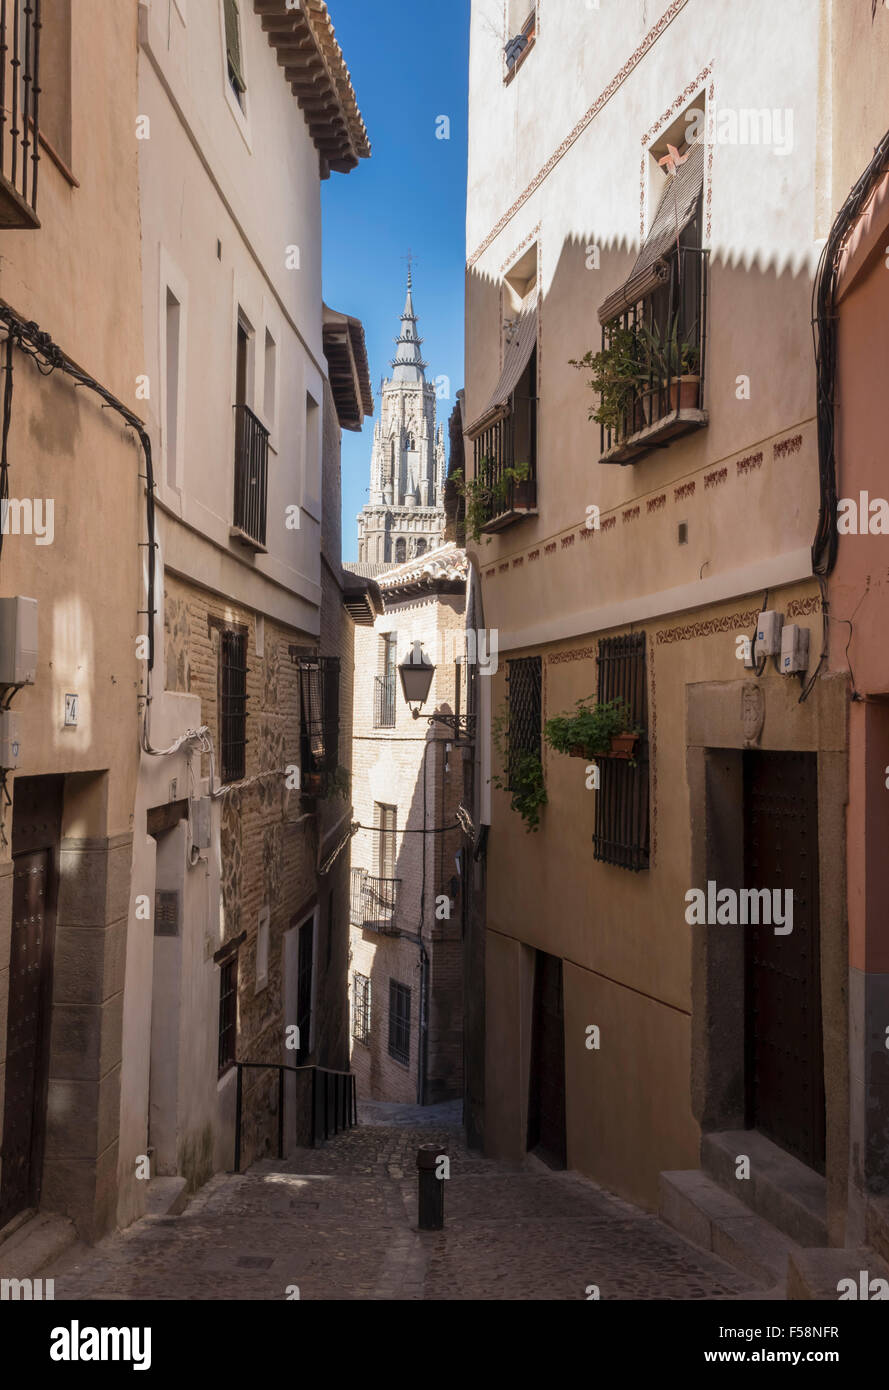 Narrow streets and homes in ancient city of Toledo, Spain, Europe Stock Photo